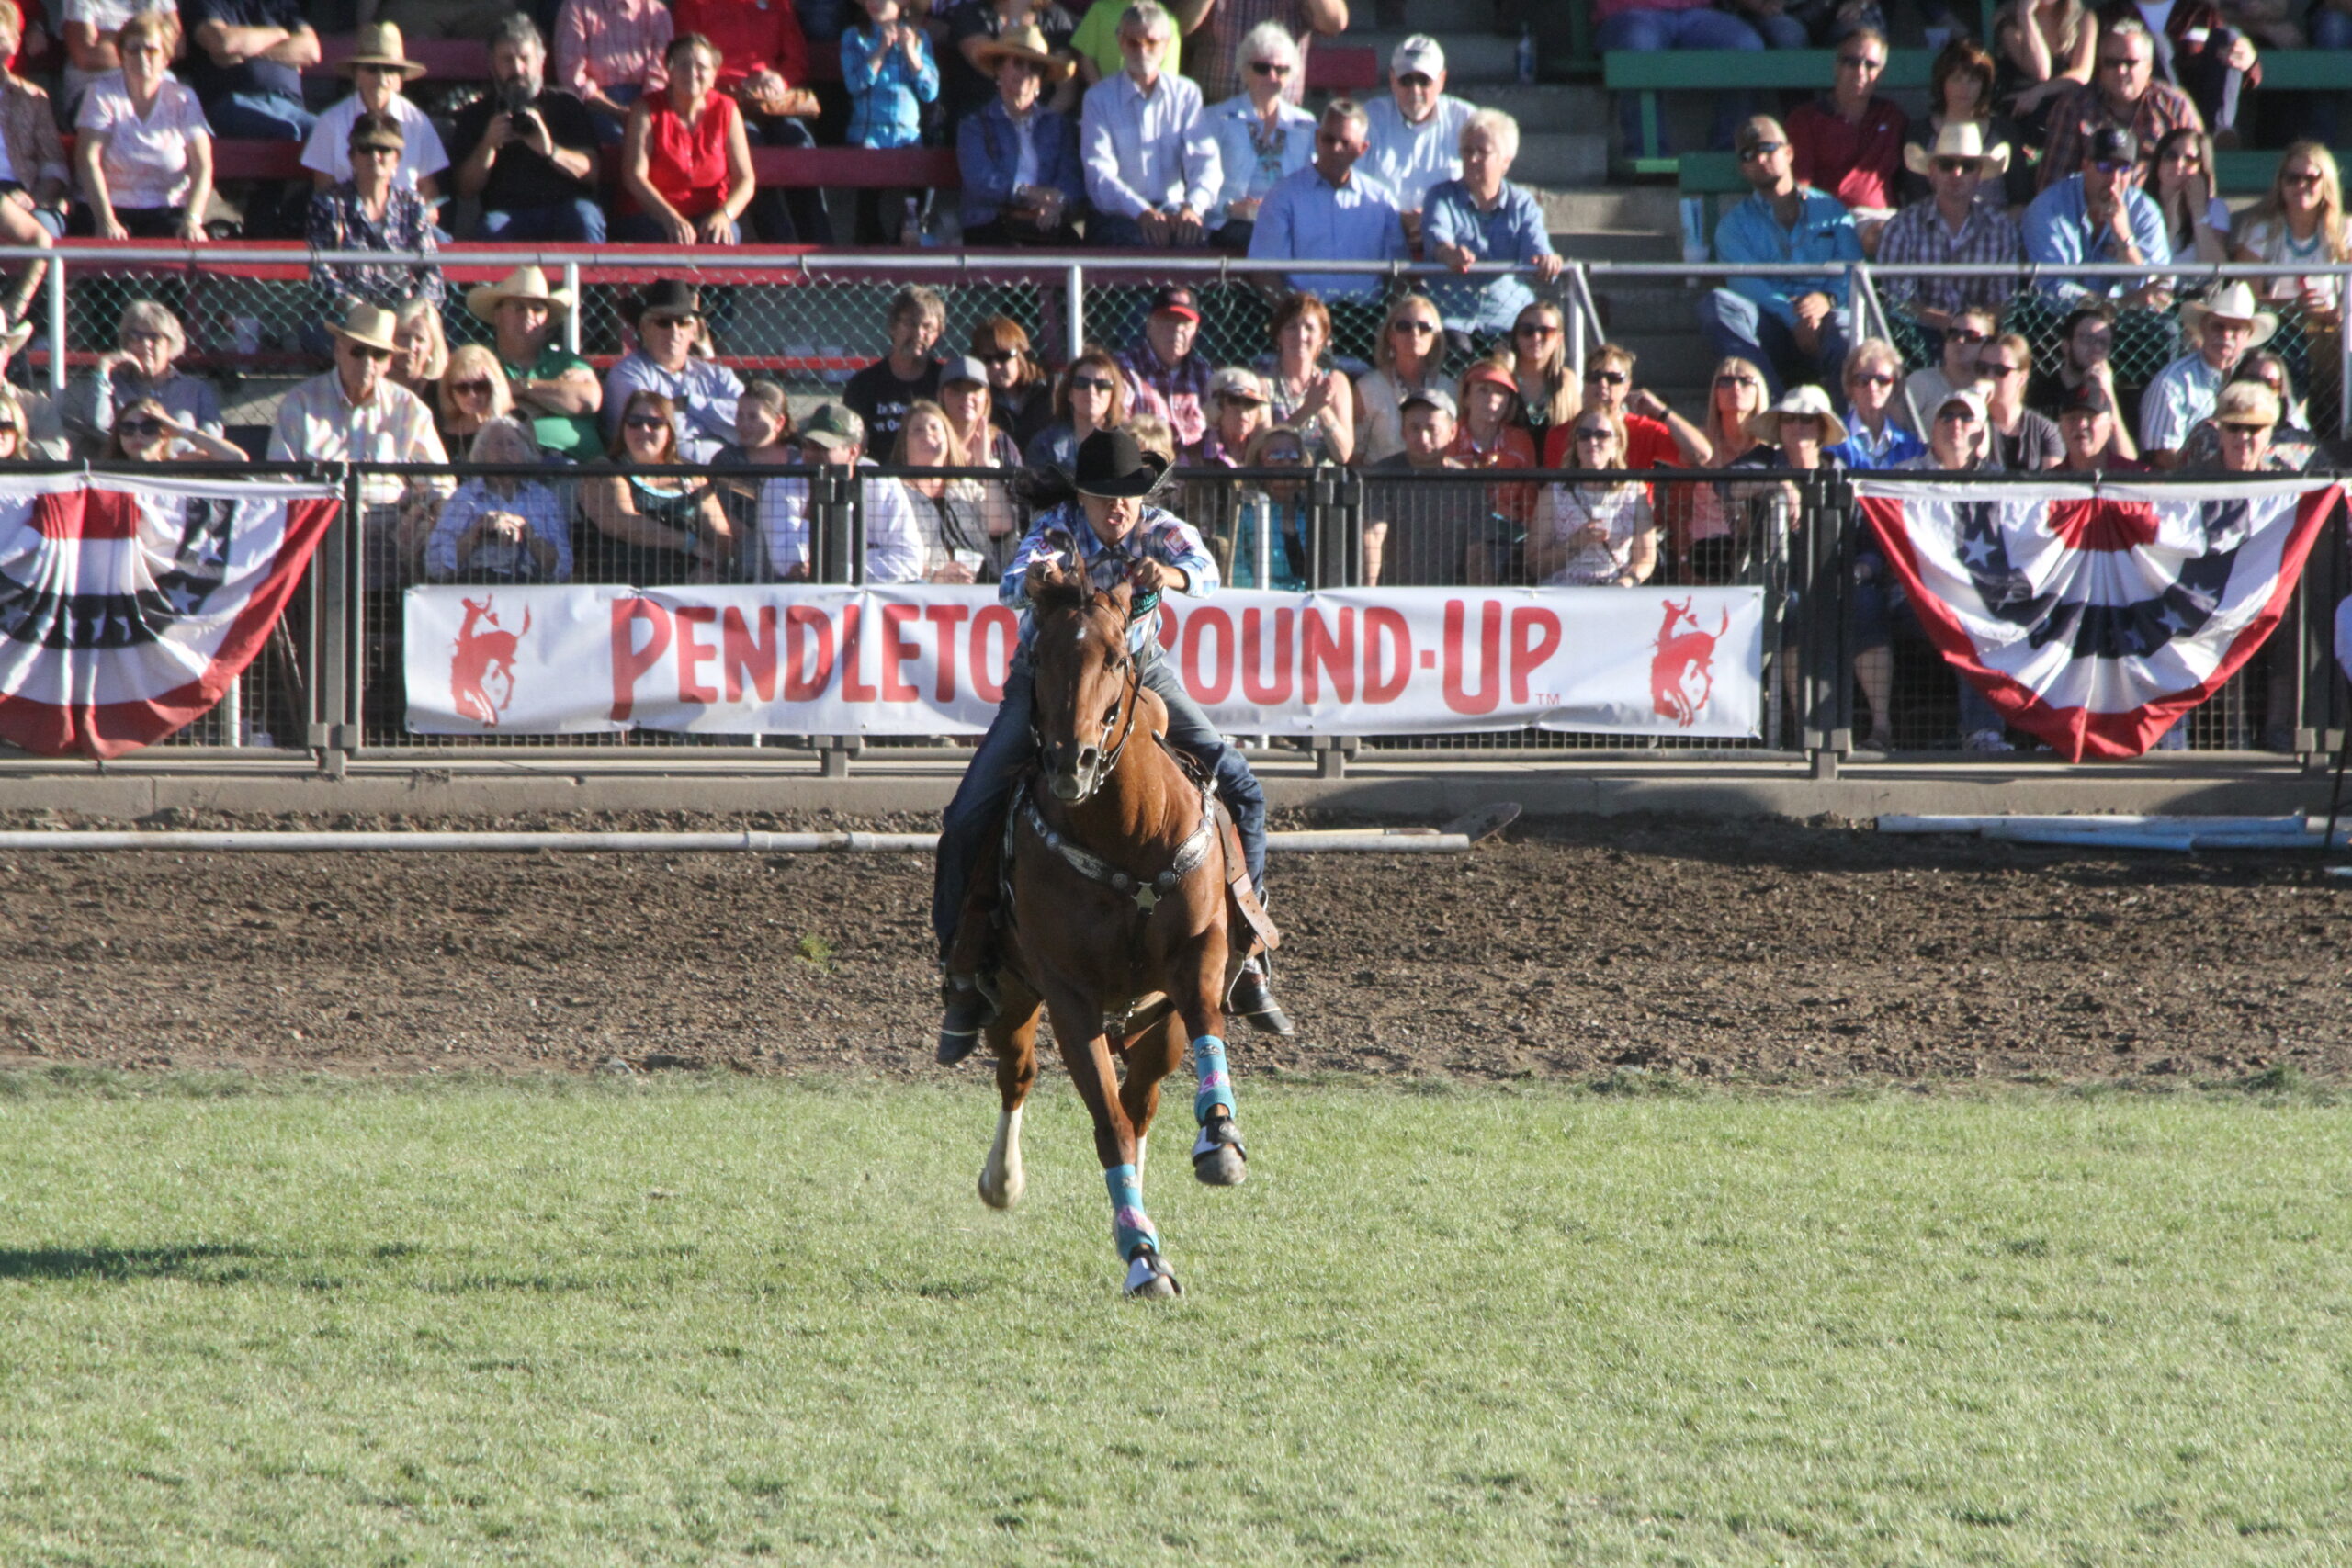 Gear up with Wrangler for the Pendleton RoundUp 2022!